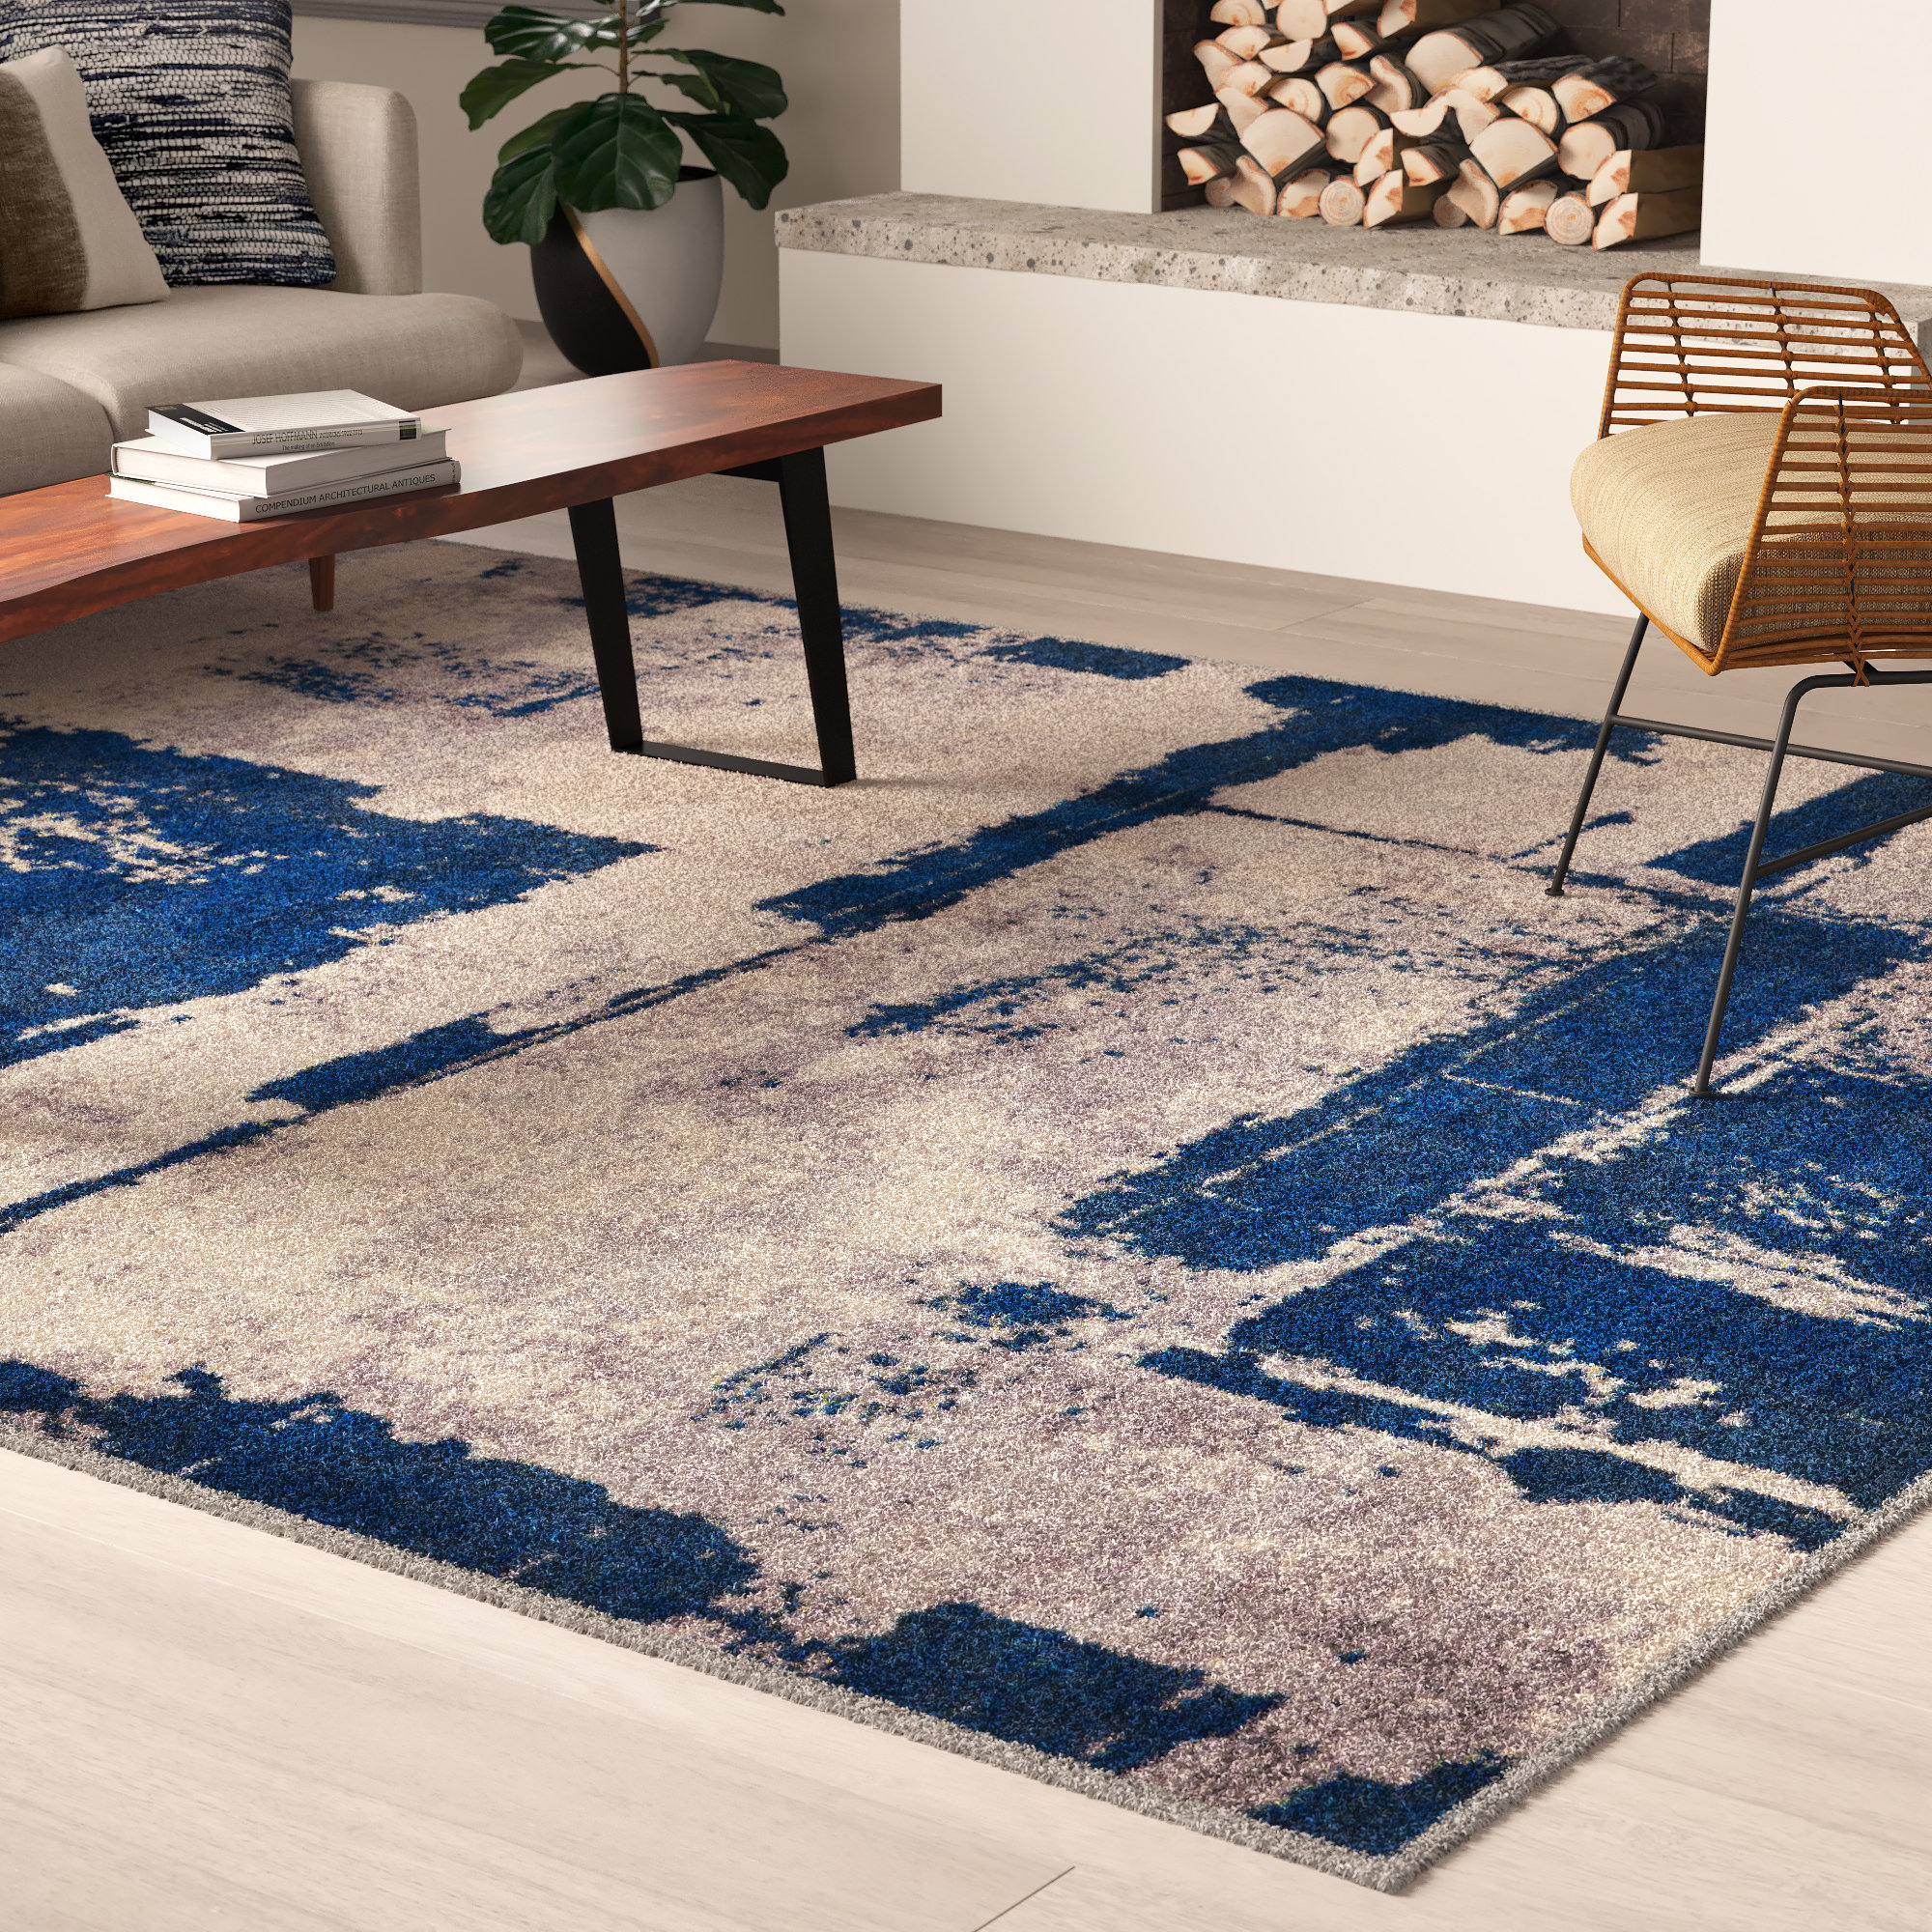 Abstract Contemporary Modern Design Mixed Brush Pattern Rug Carpet Home Decor 